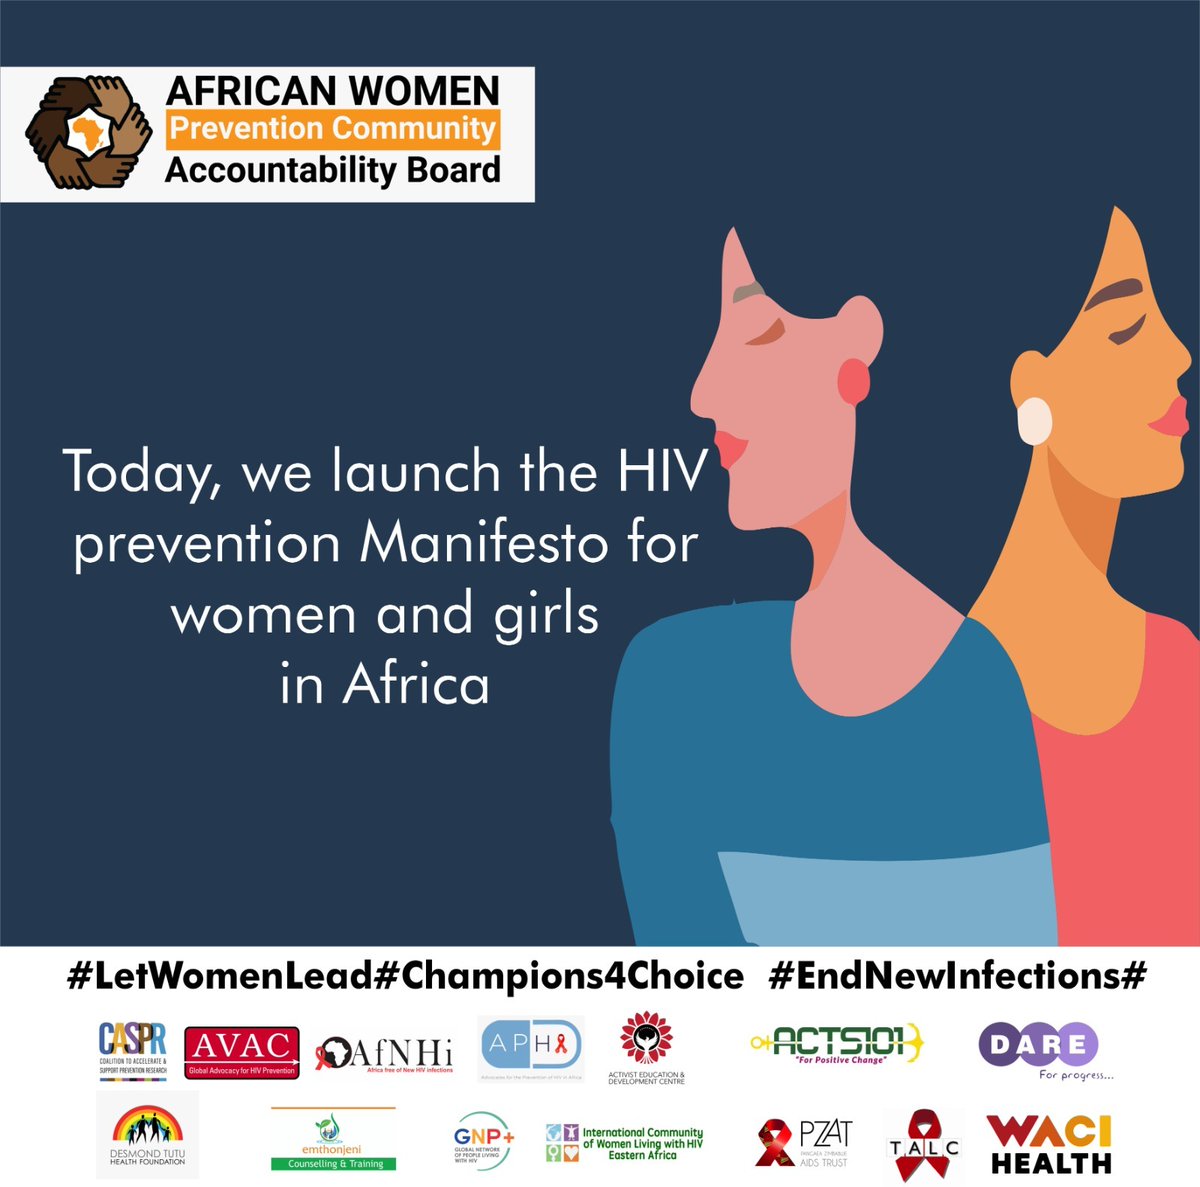 The #ChoiceManifesto, a gamechanger in HIV prevention for African women and girls,was officially unveiled today in Kampala.Join us as we empower and advocate the right to health and dignity as the #Champions4Choice. We must #EndNewInfections. Encourage choice with @HIVpxresearch